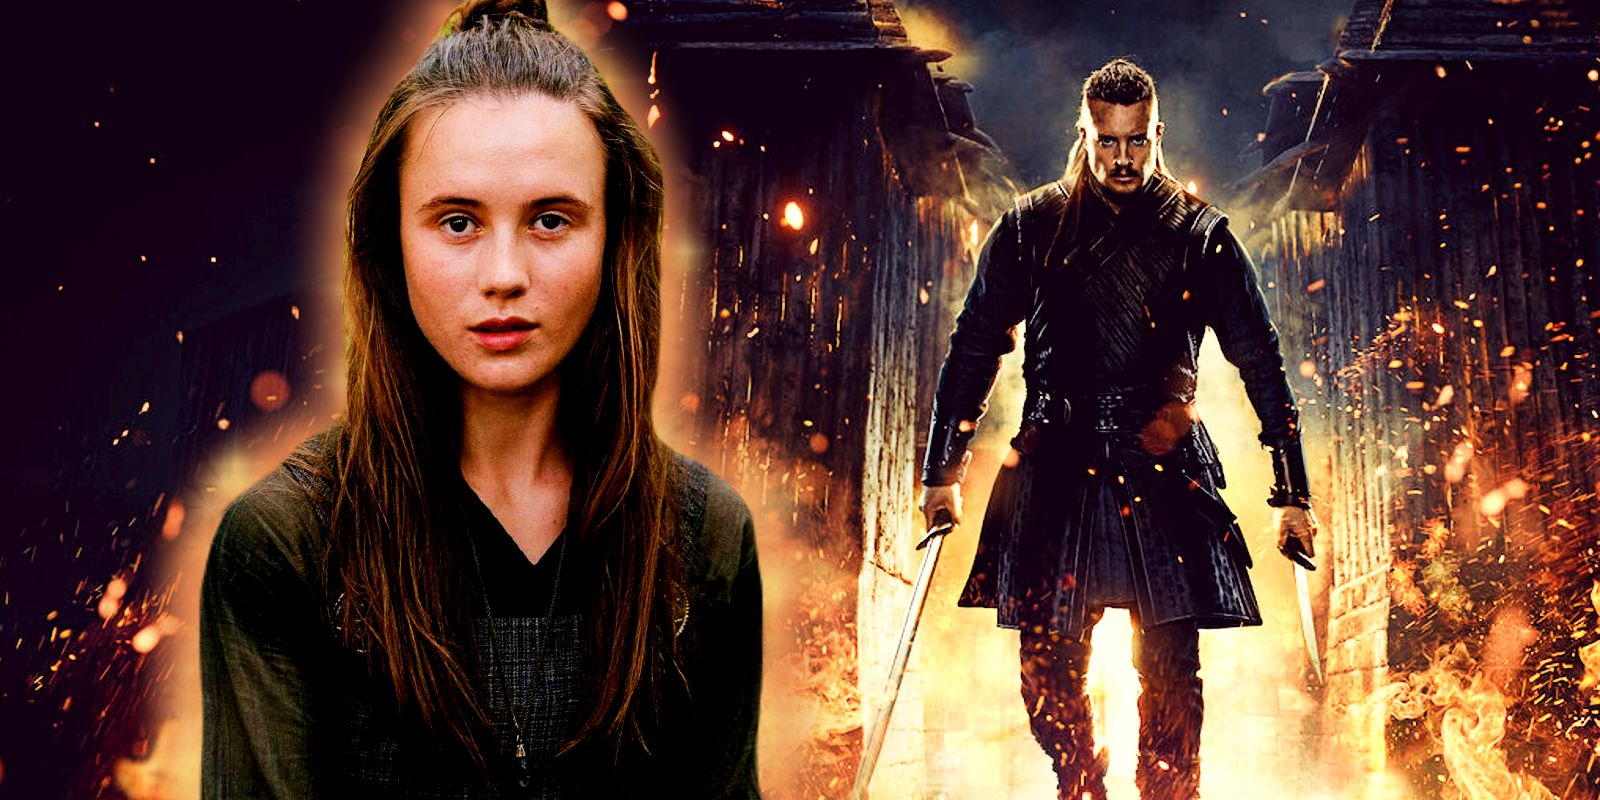 This collage shows the poster for The Last Kingdom with Stiorra with fire behind her. 